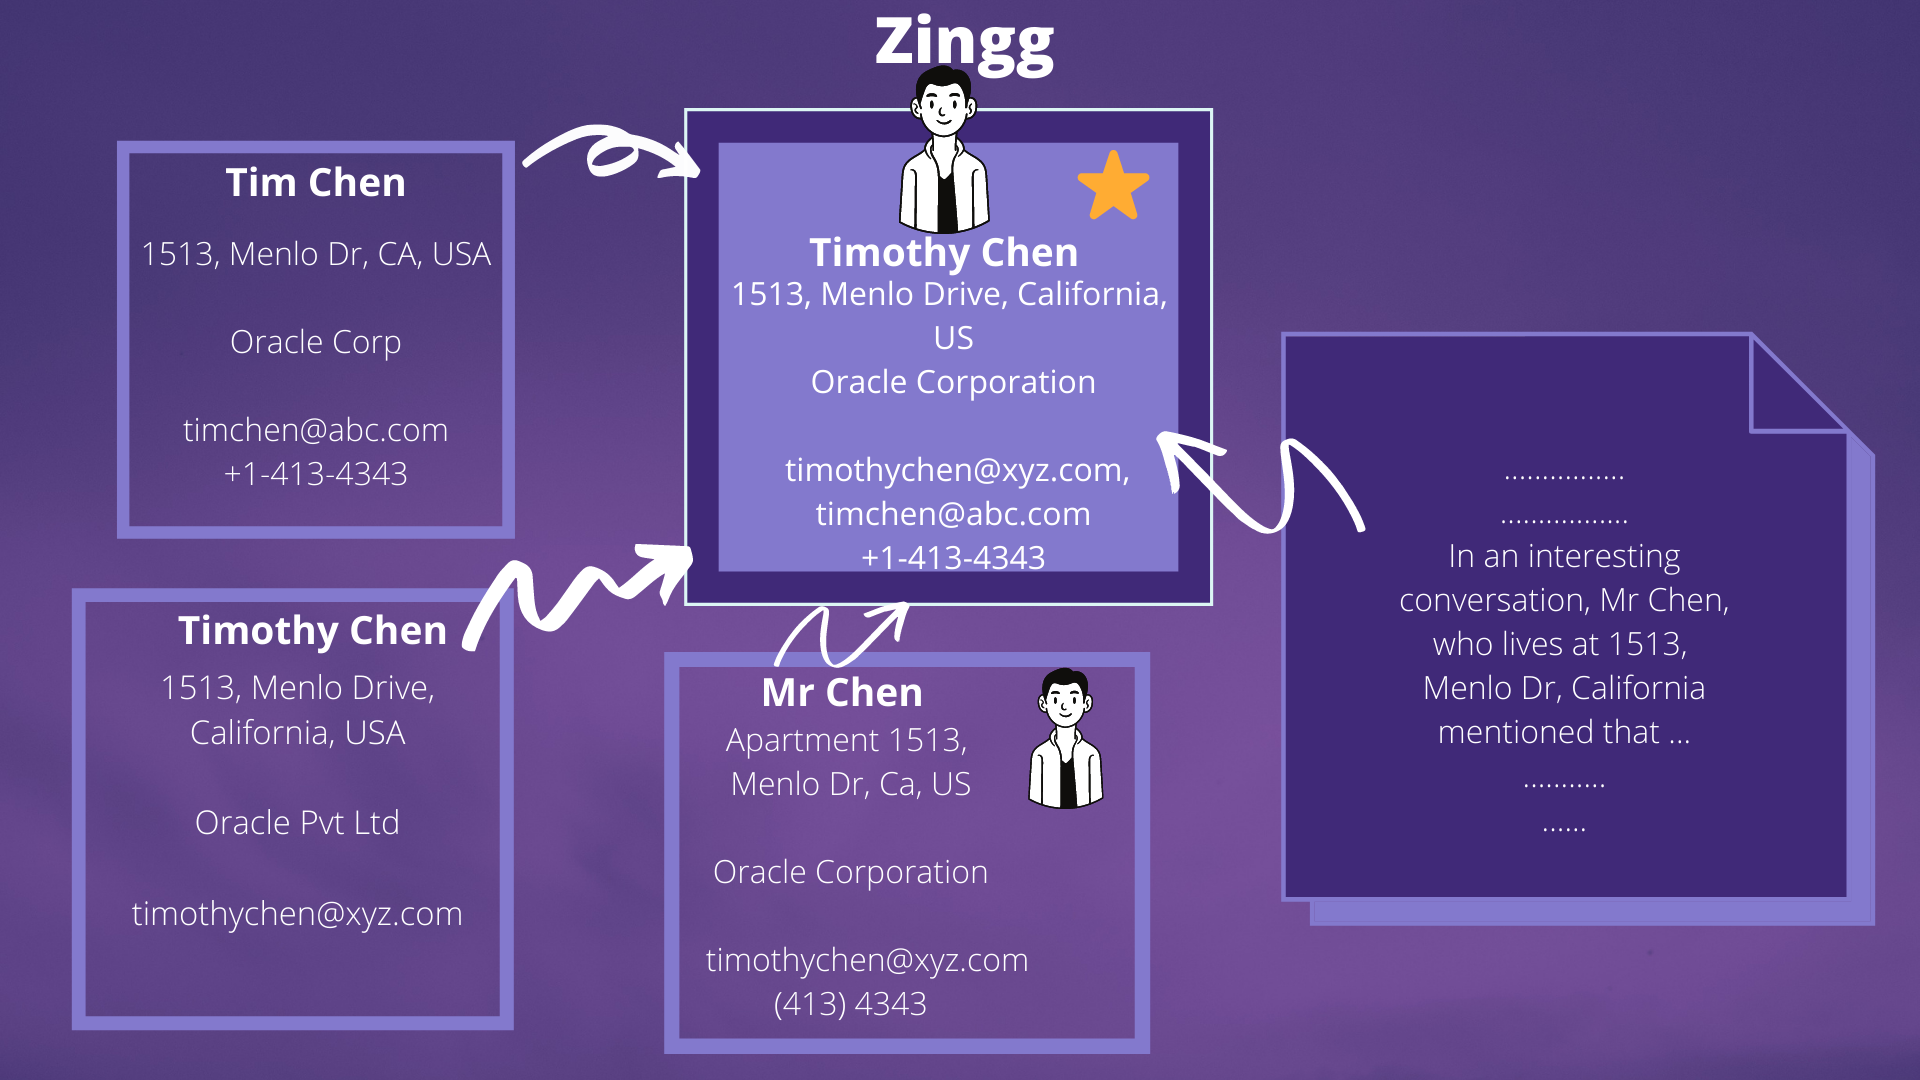 # Zingg - Data Mastering At Scale with ML